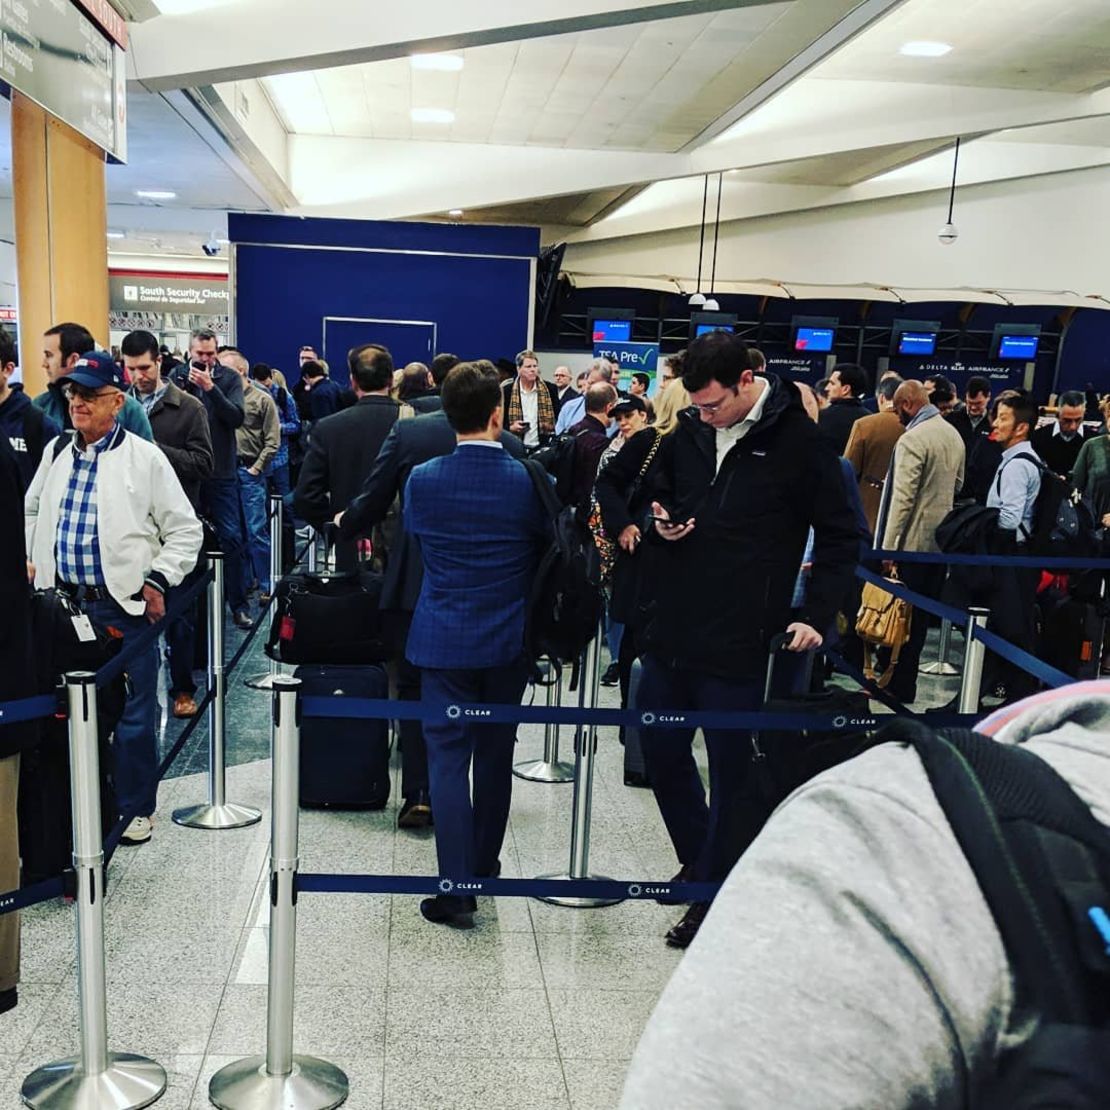 Some travelers waited in security lines for more than two hours at Atlanta's Hartsfield-Jackson International Airport on Monday. The government shutdown has led to increased absences among TSA workers nationwide, putting a strain on airport checkpoints.